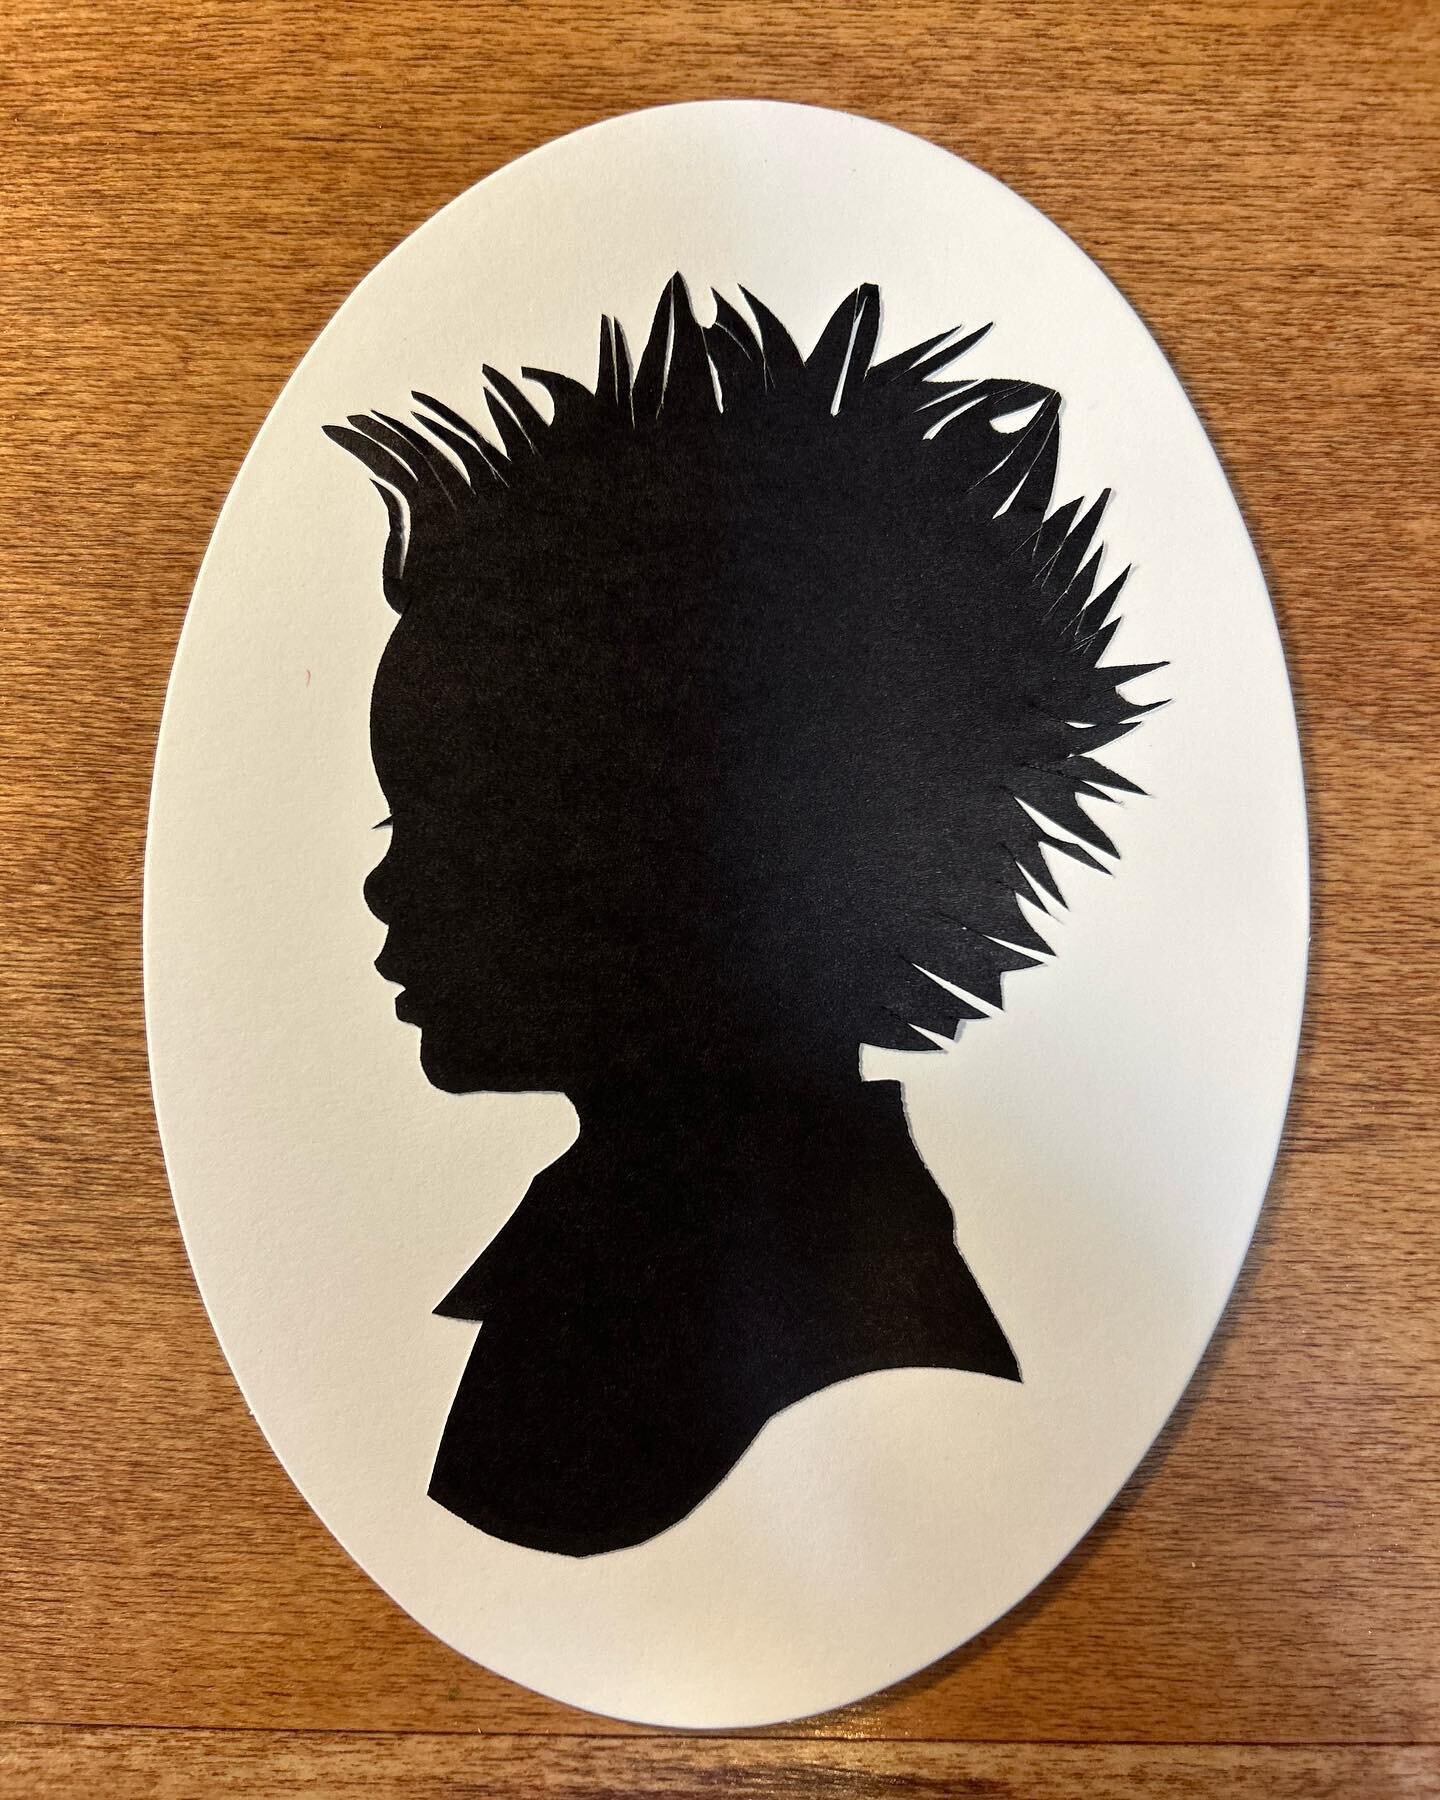 Now that&rsquo;s some cool hair ✂️ 

Don&rsquo;t forget to sign up for your Mother&rsquo;s Day silhouettes!! I have some LA area events and Zoom sessions open this week. Sign up at https://www.cutarts.com/calendar or at the link in my bio.
#cutarts #